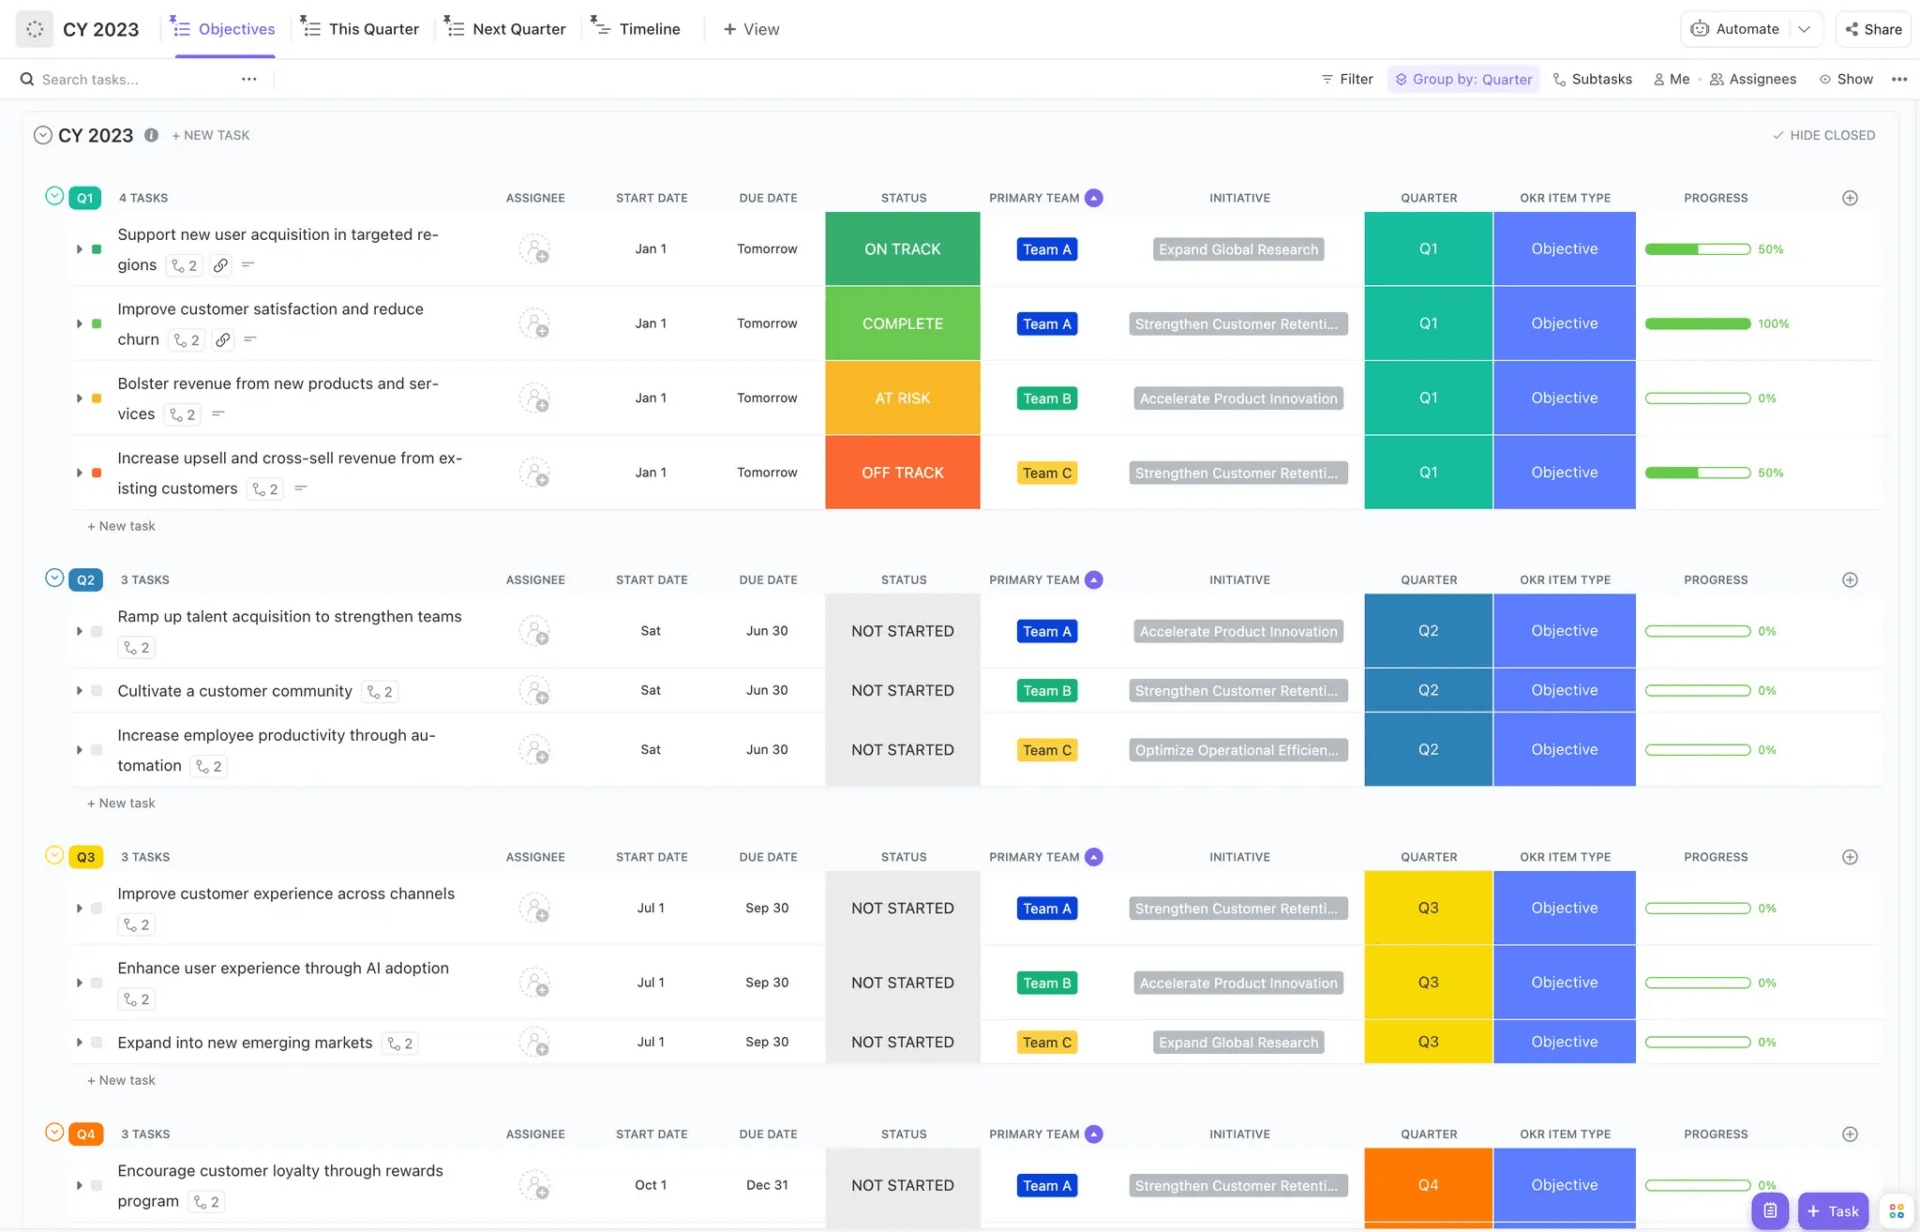 ClickUp’s OKR Folder Template allows leaders to monitor OKR cycles year-on-year